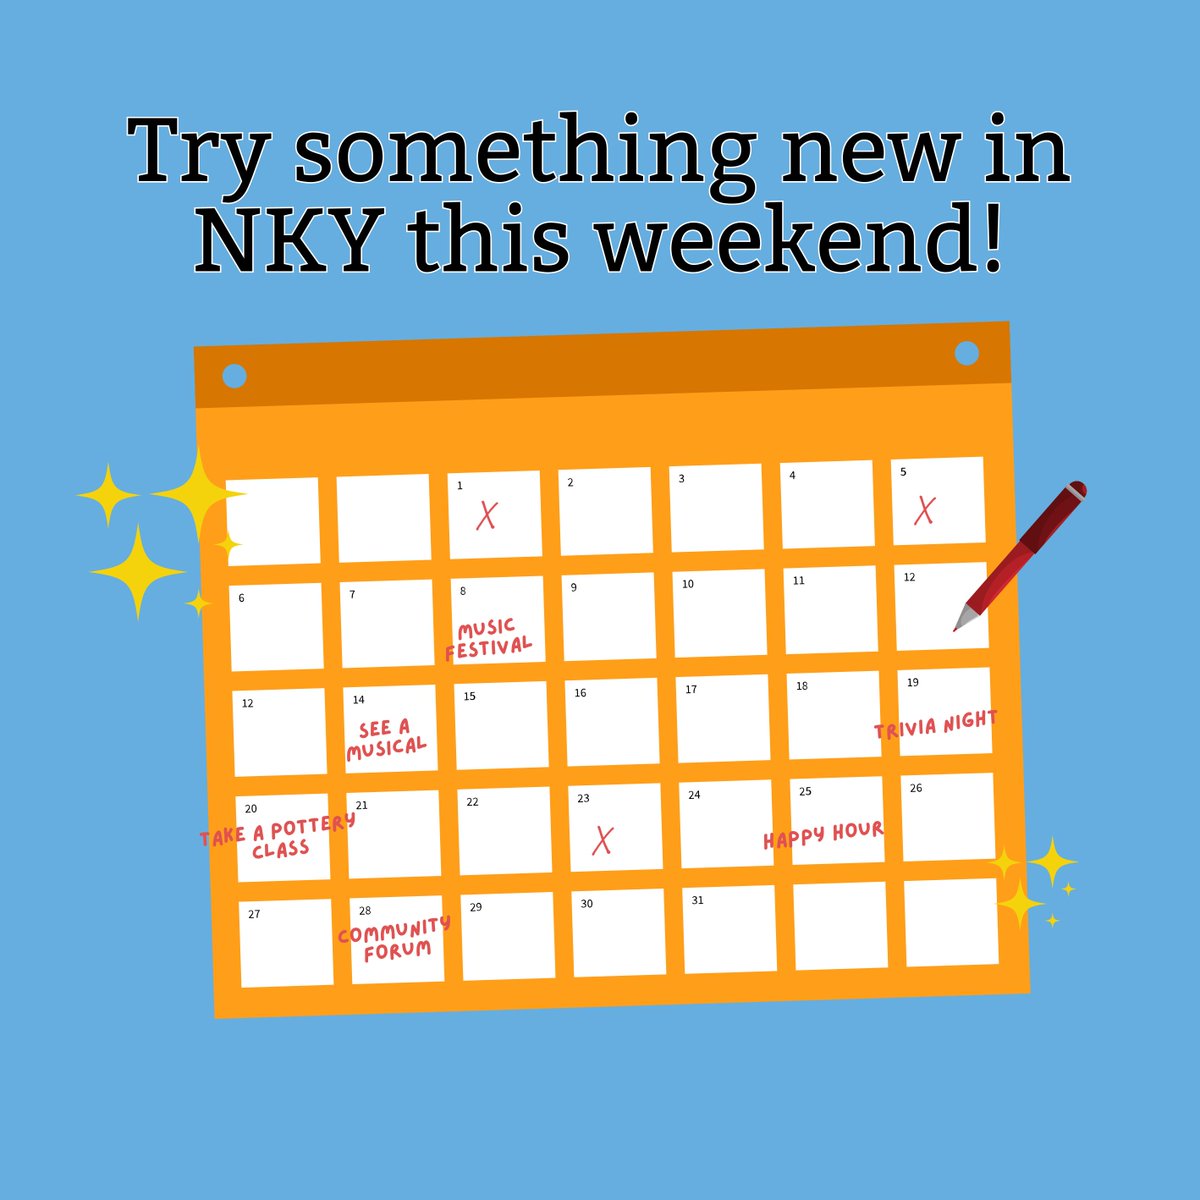 This weekend is full of fun in NKY. From a flea market in Fort Thomas to Summer Reading Kick Off festivities in Burlington. Find all that and more on our events calendar: tinyurl.com/y2dpkfvw?utm_m…